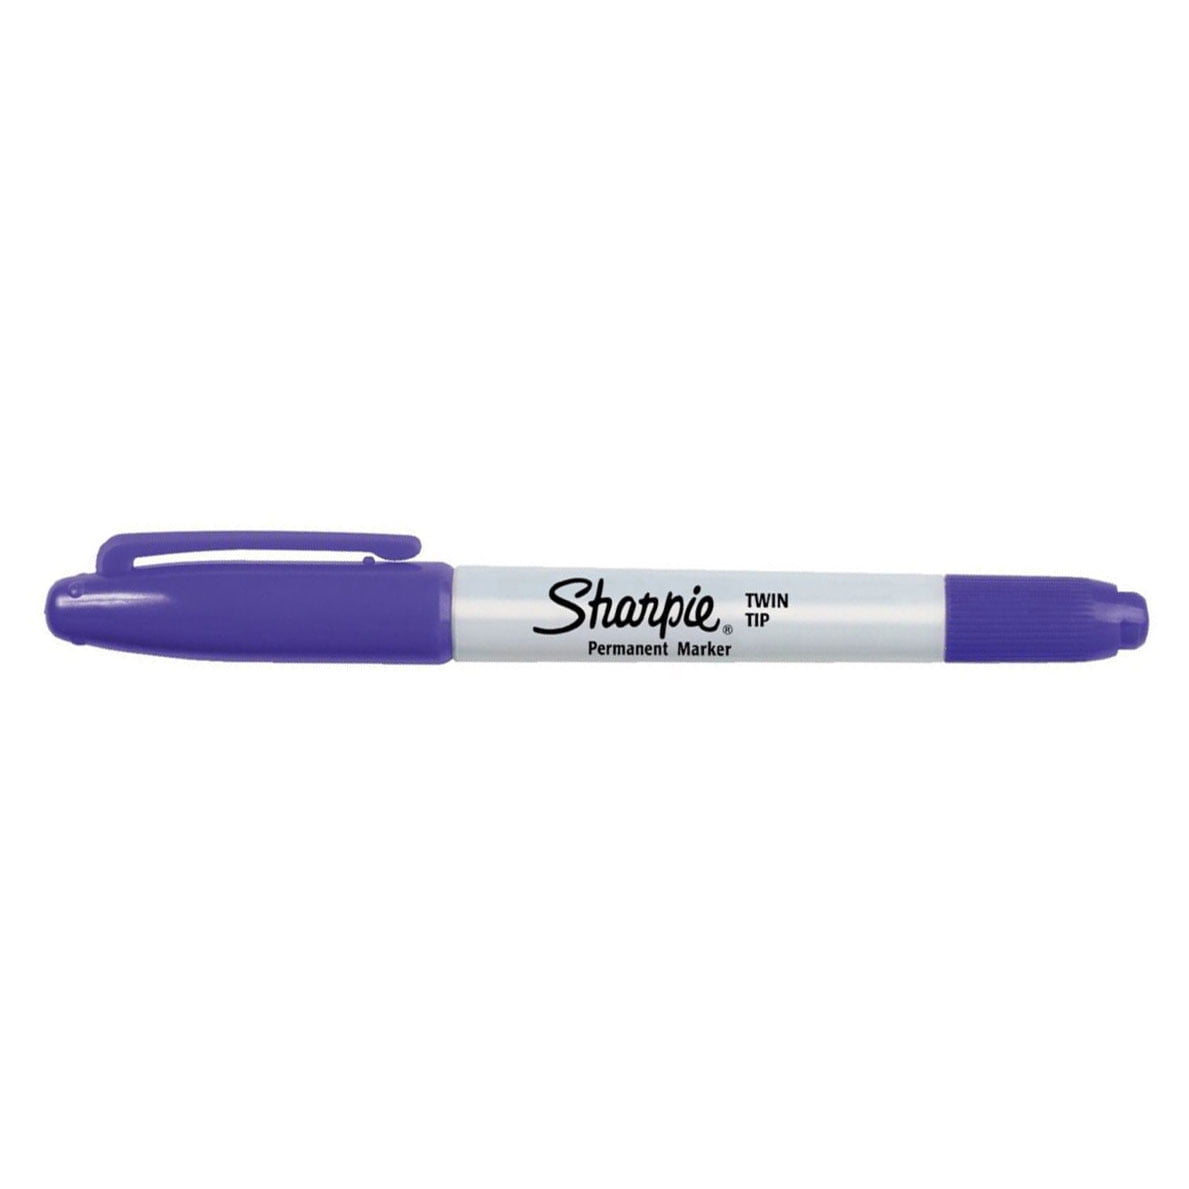 BULK Carton Permanent Marker - Lilac - Fine Tip - Sharpie (14938 available  as of 4/25/2023)